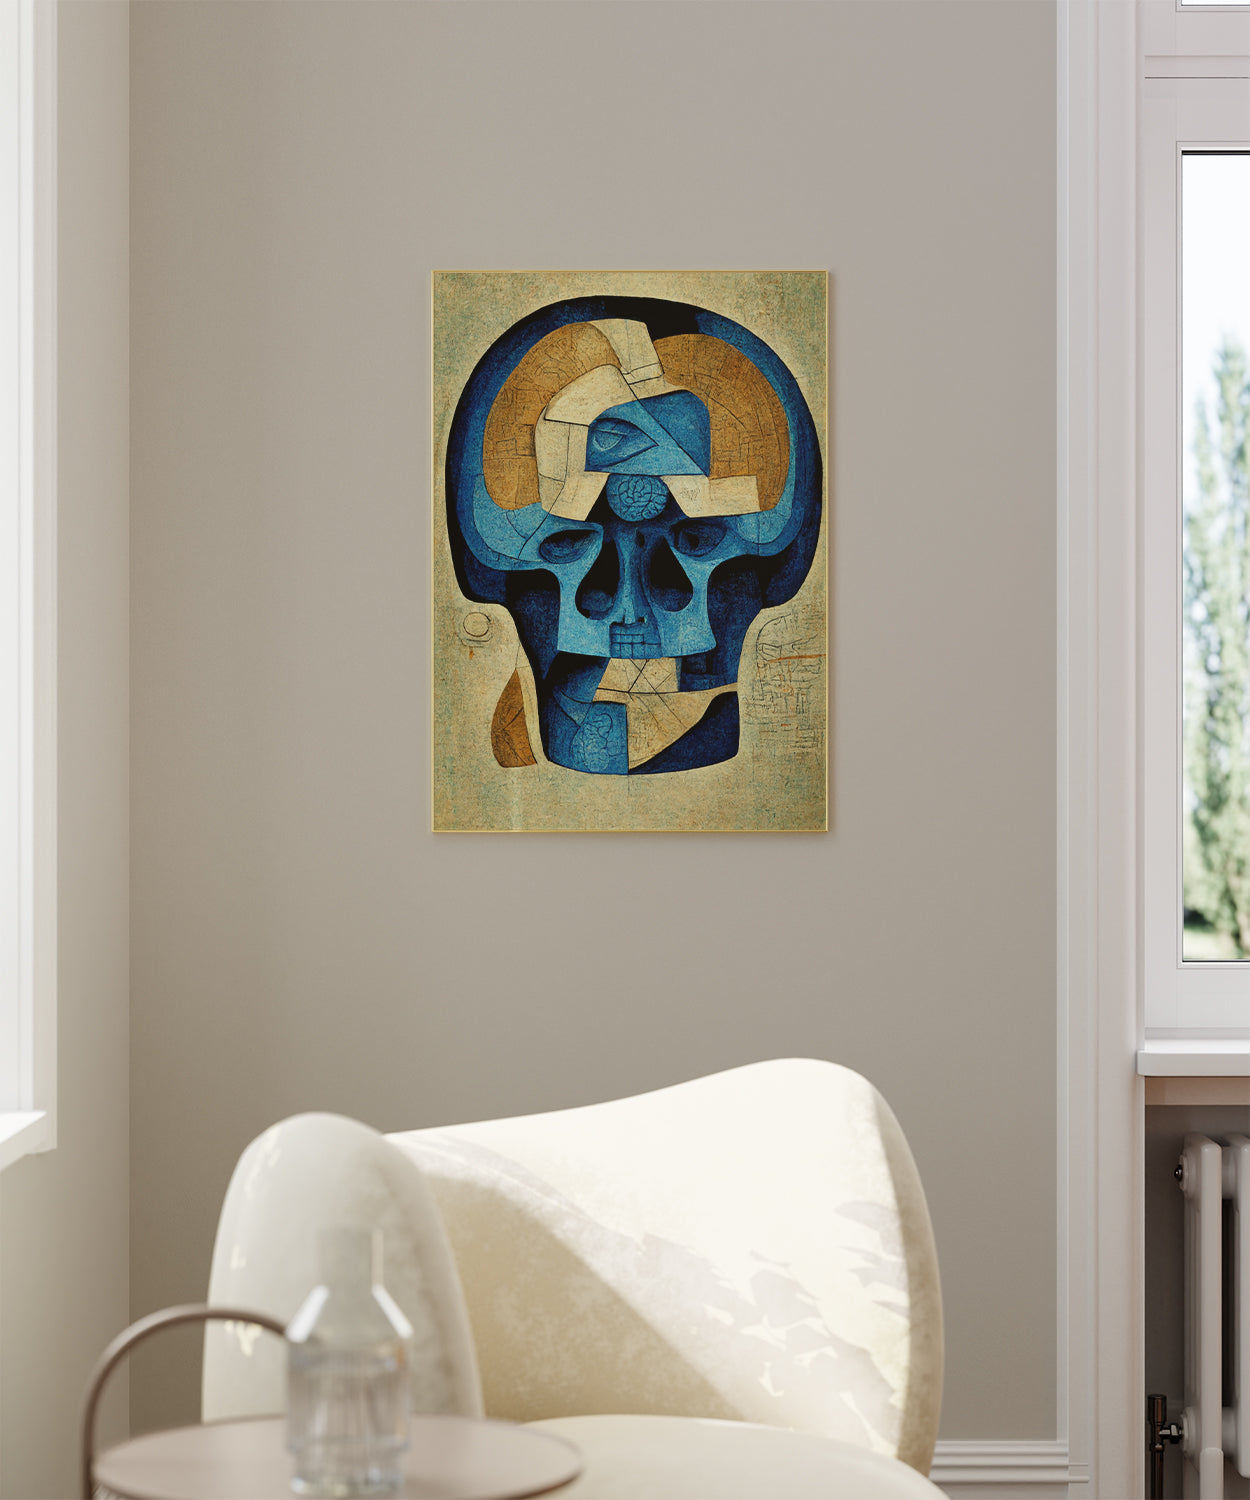 Artistic Brain Anatomy - Infuse creativity and professionalism into your clinic with this brain anatomy artwork, designed for neurology and neurosurgery environments.